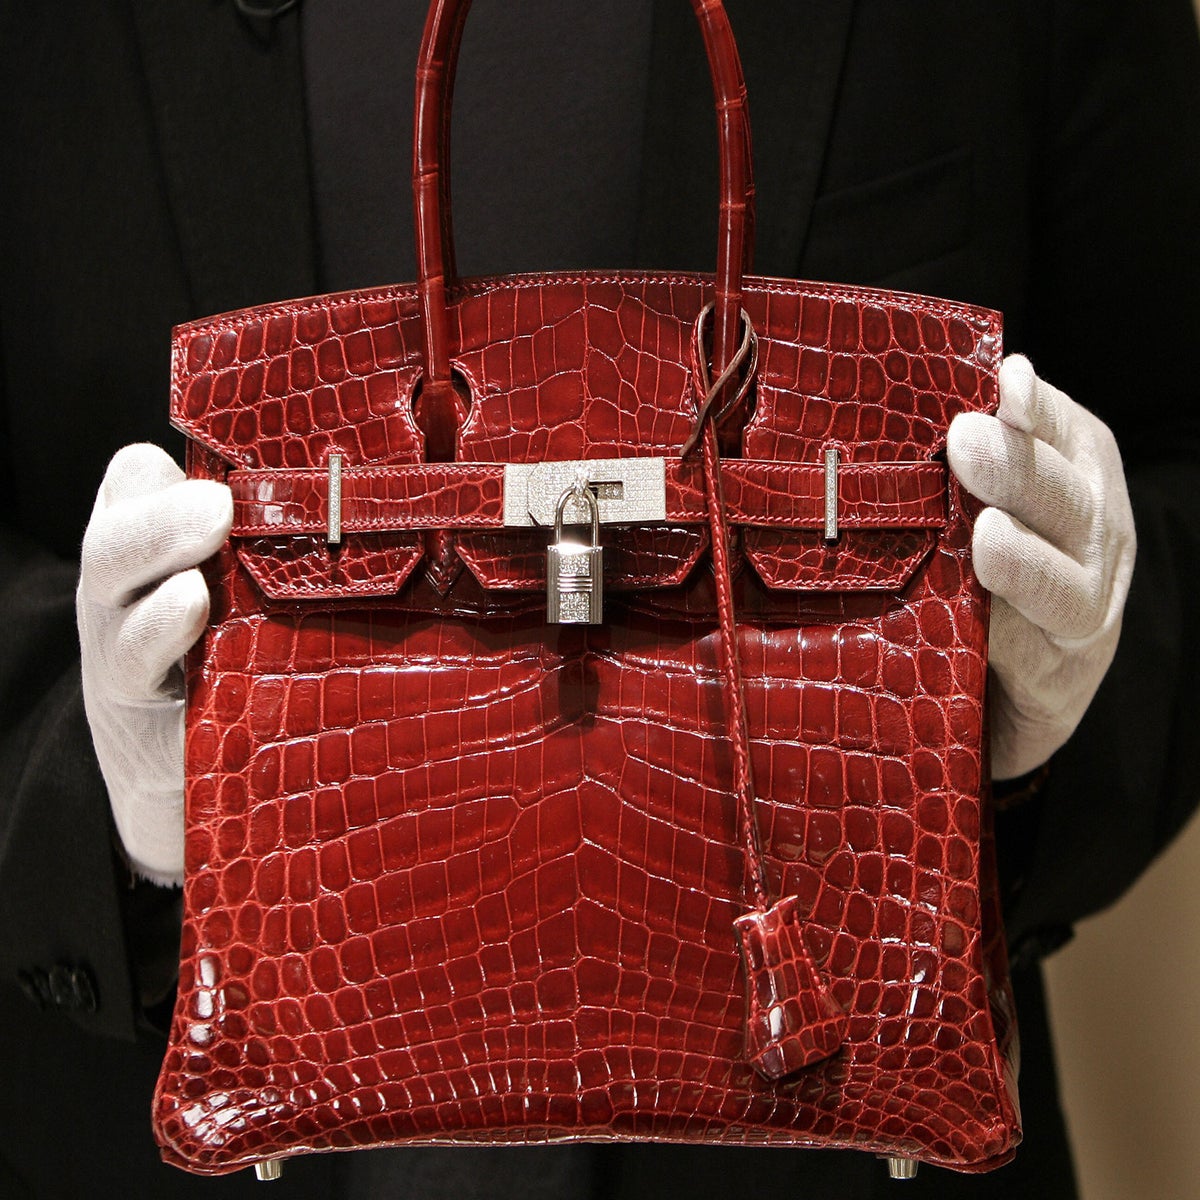 Hermès Birkin bag a better investment than gold and stock market? See what  experts say about investing in the iconic luxury handbags, inspired by  style icon Jane Birkin who passed away at